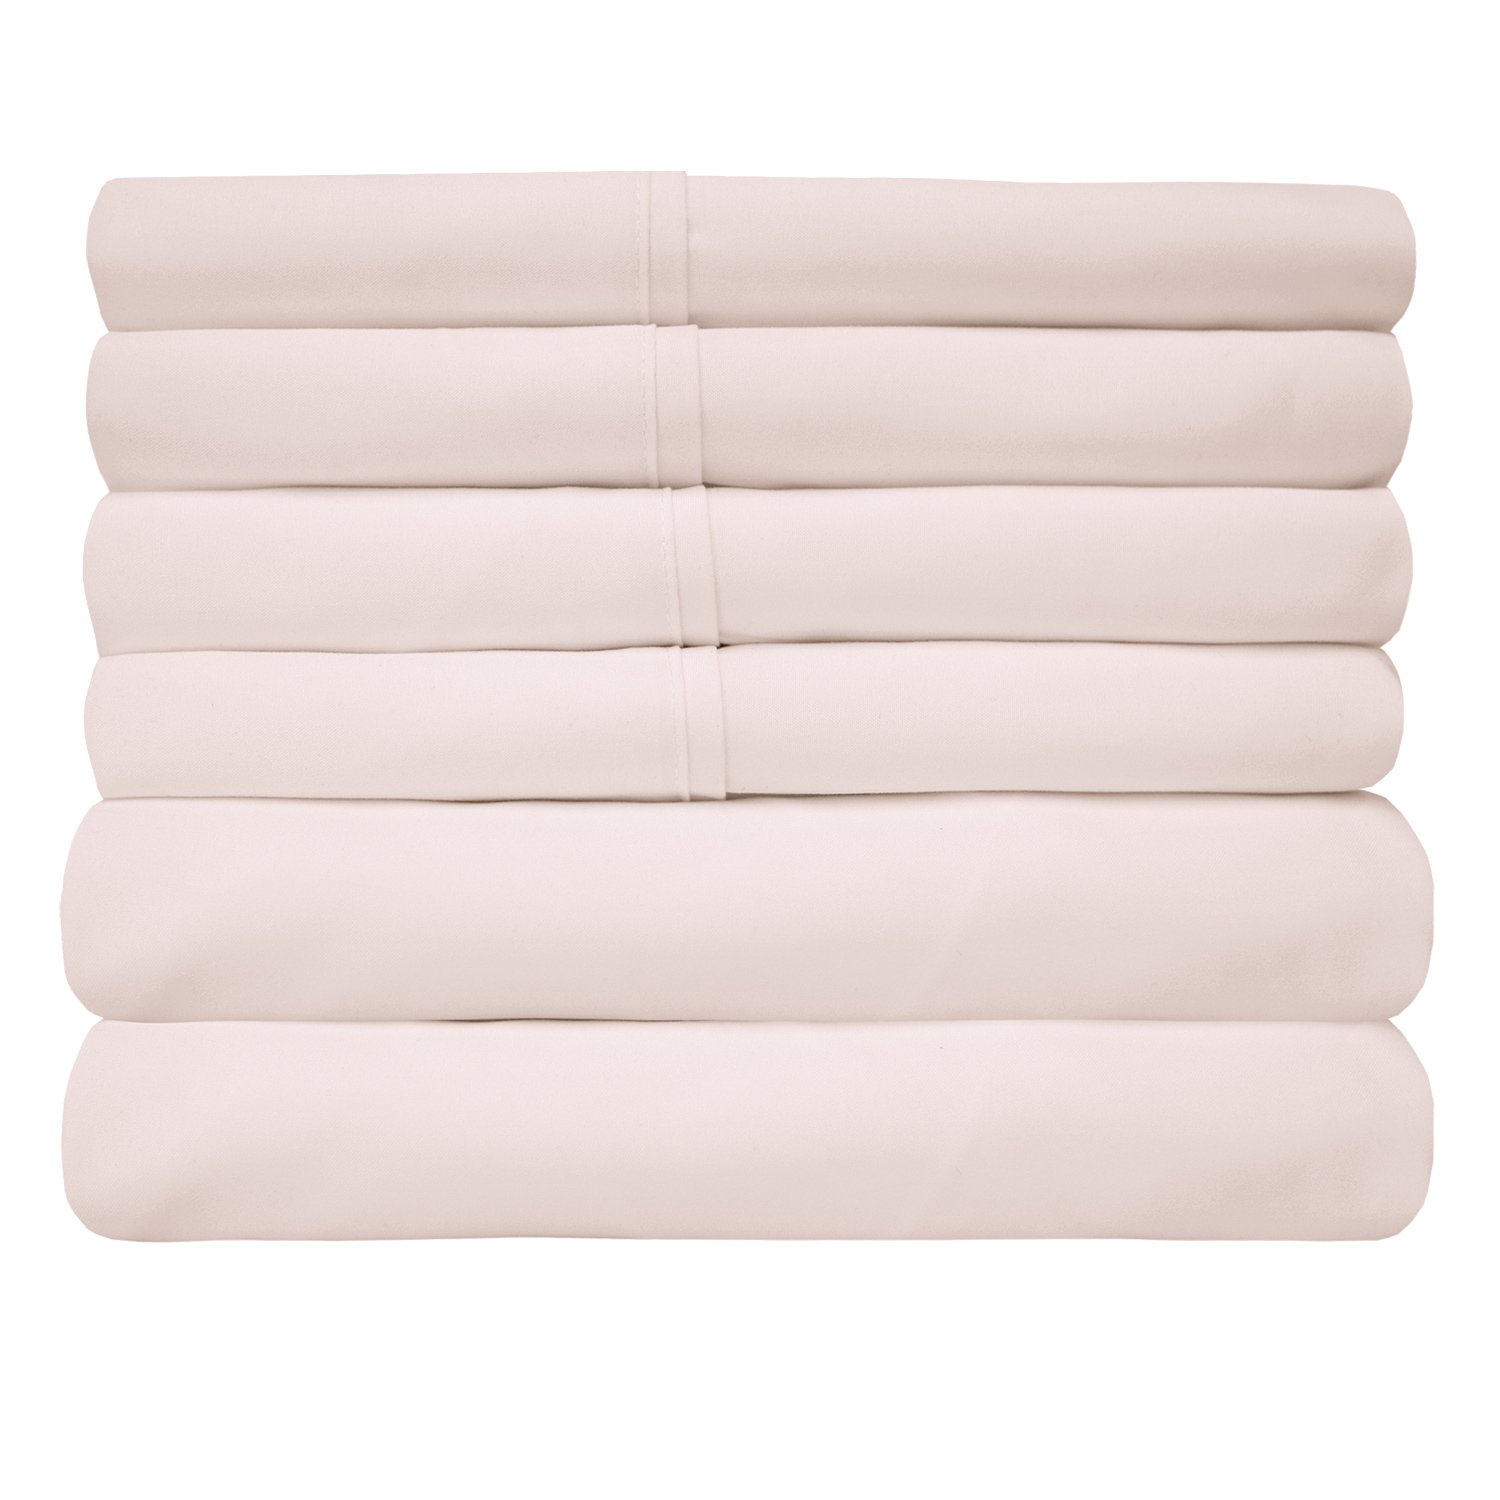 Deluxe 6-Piece Bed Sheet Set (Pale Pink) - Folded 2